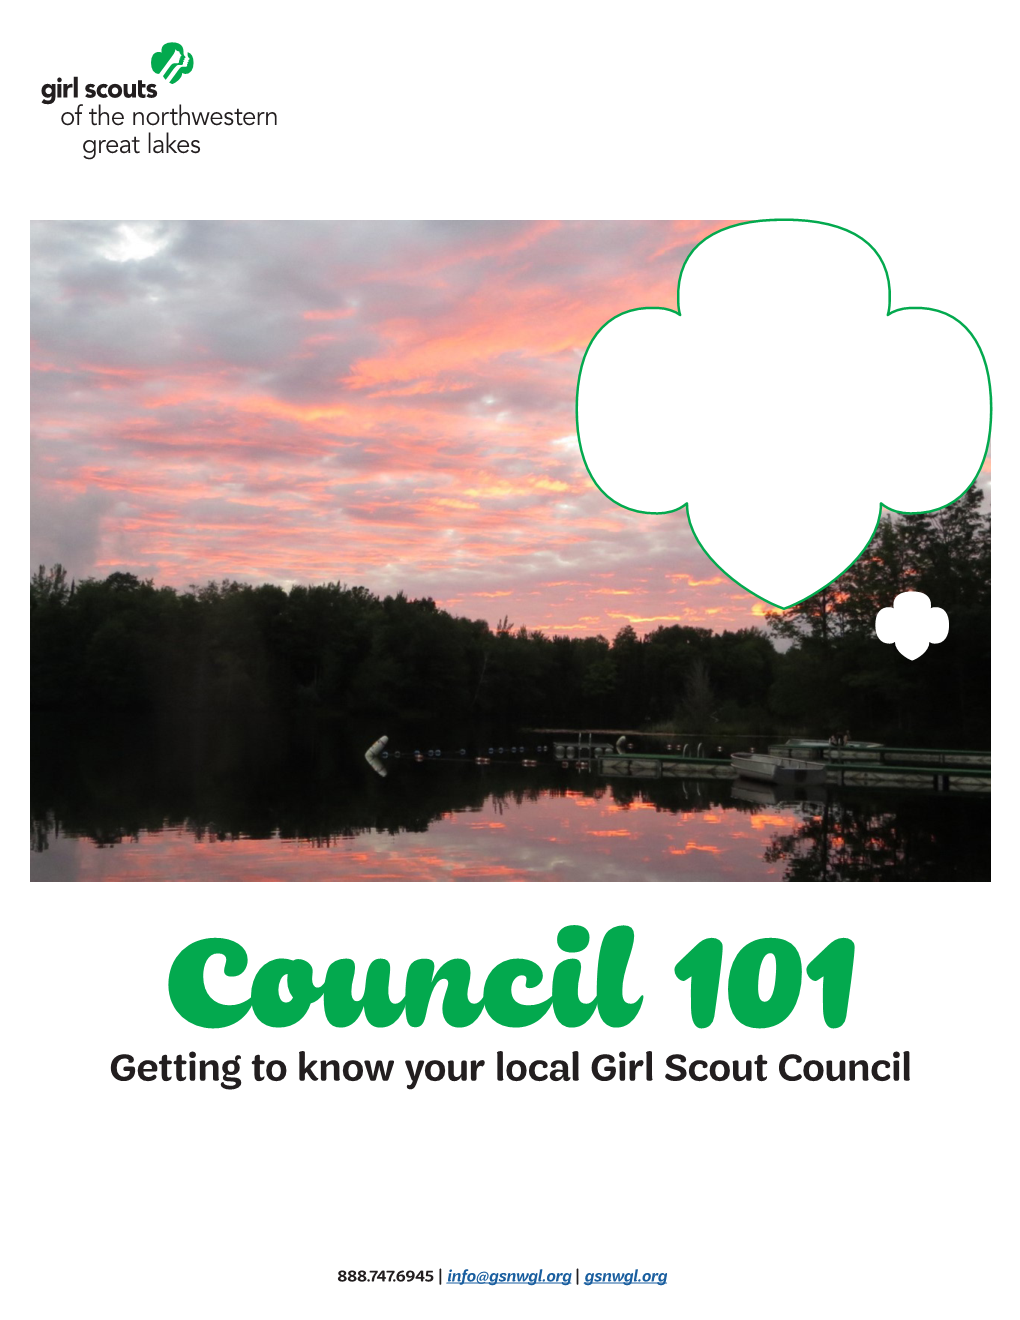 Council 101 Getting to Know Your Local Girl Scout Council